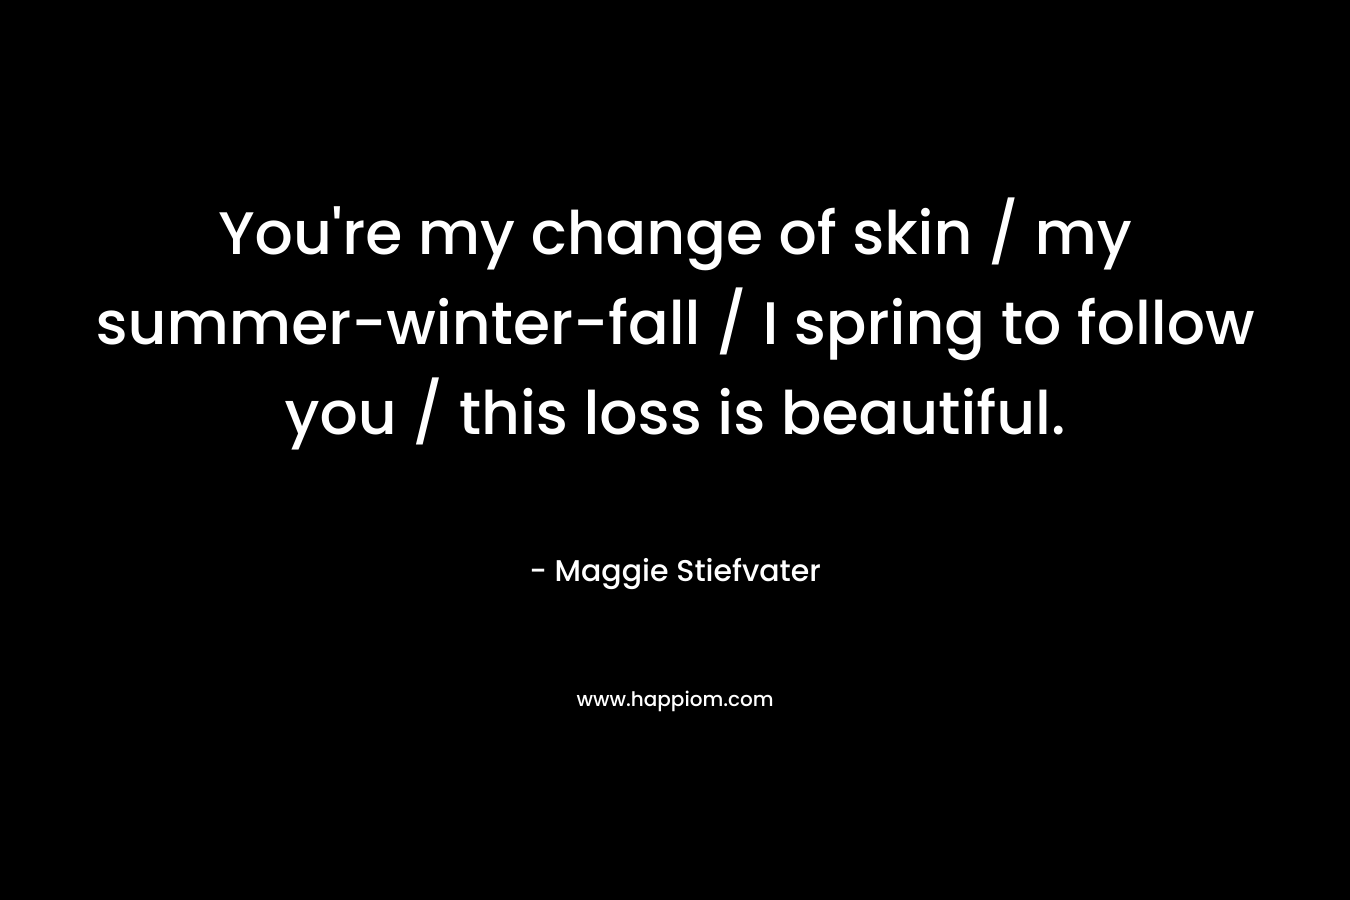 You're my change of skin / my summer-winter-fall / I spring to follow you / this loss is beautiful.